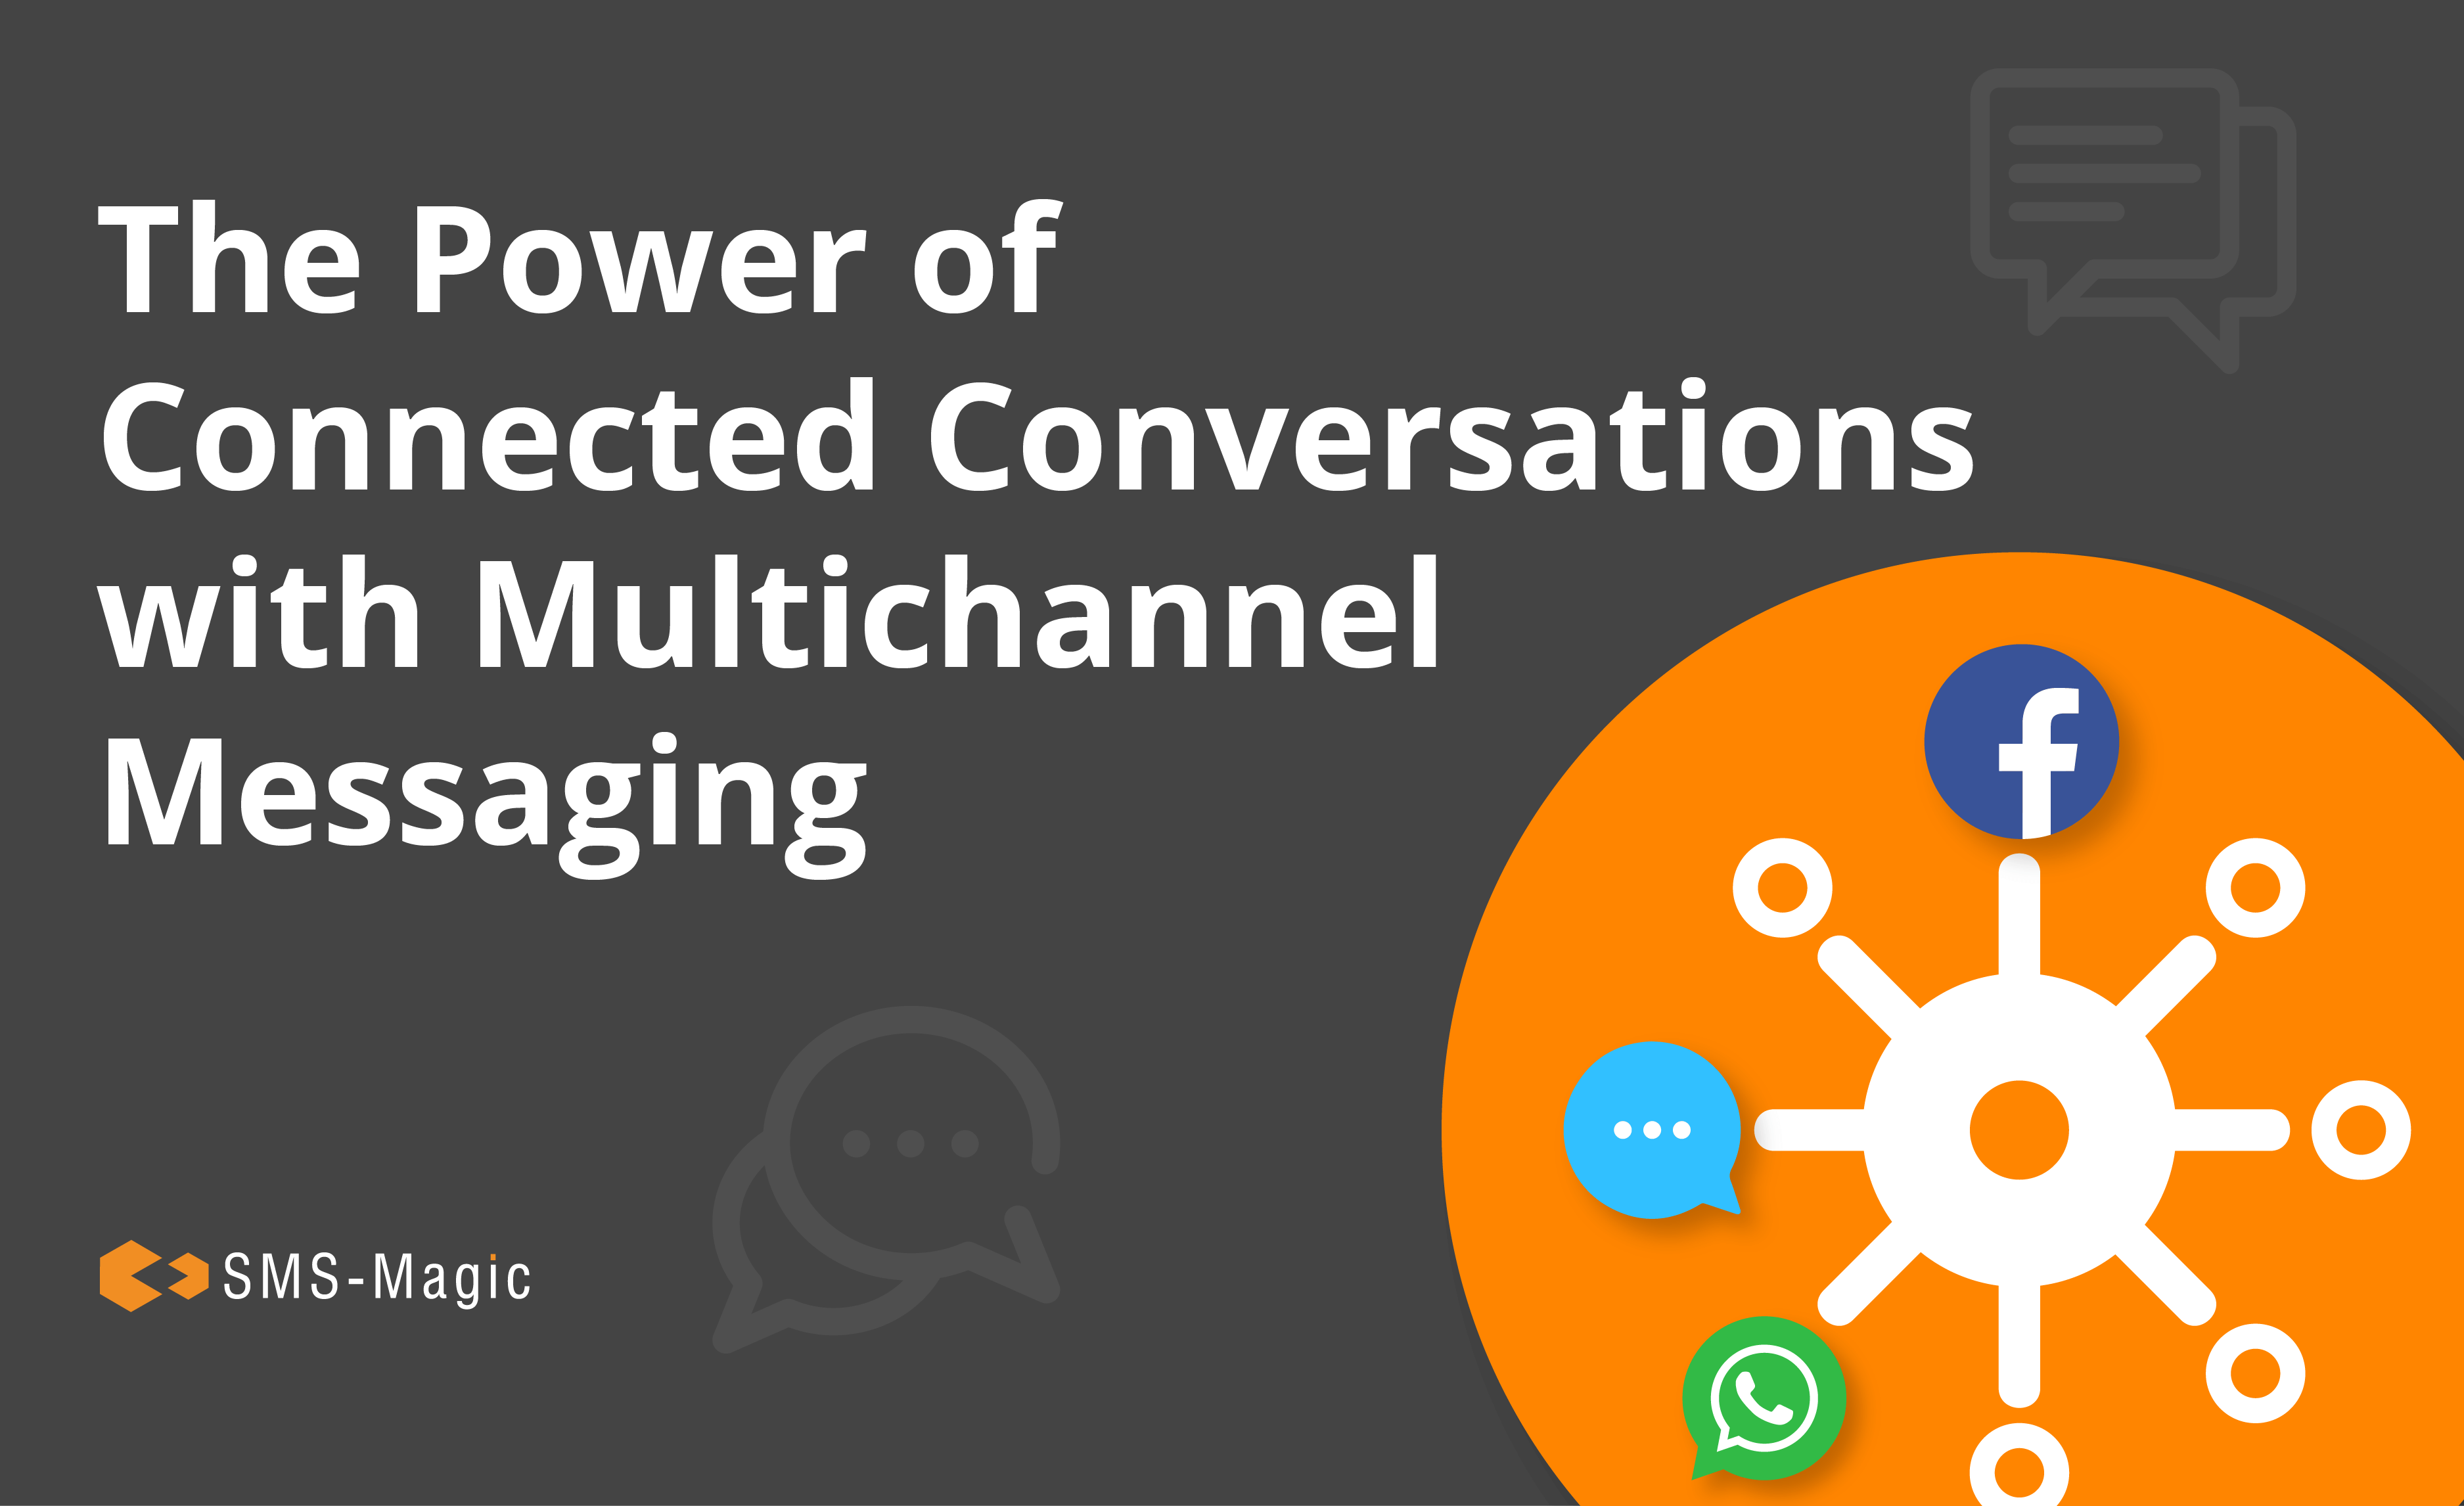 The power of connected conversations with multichannel messaging